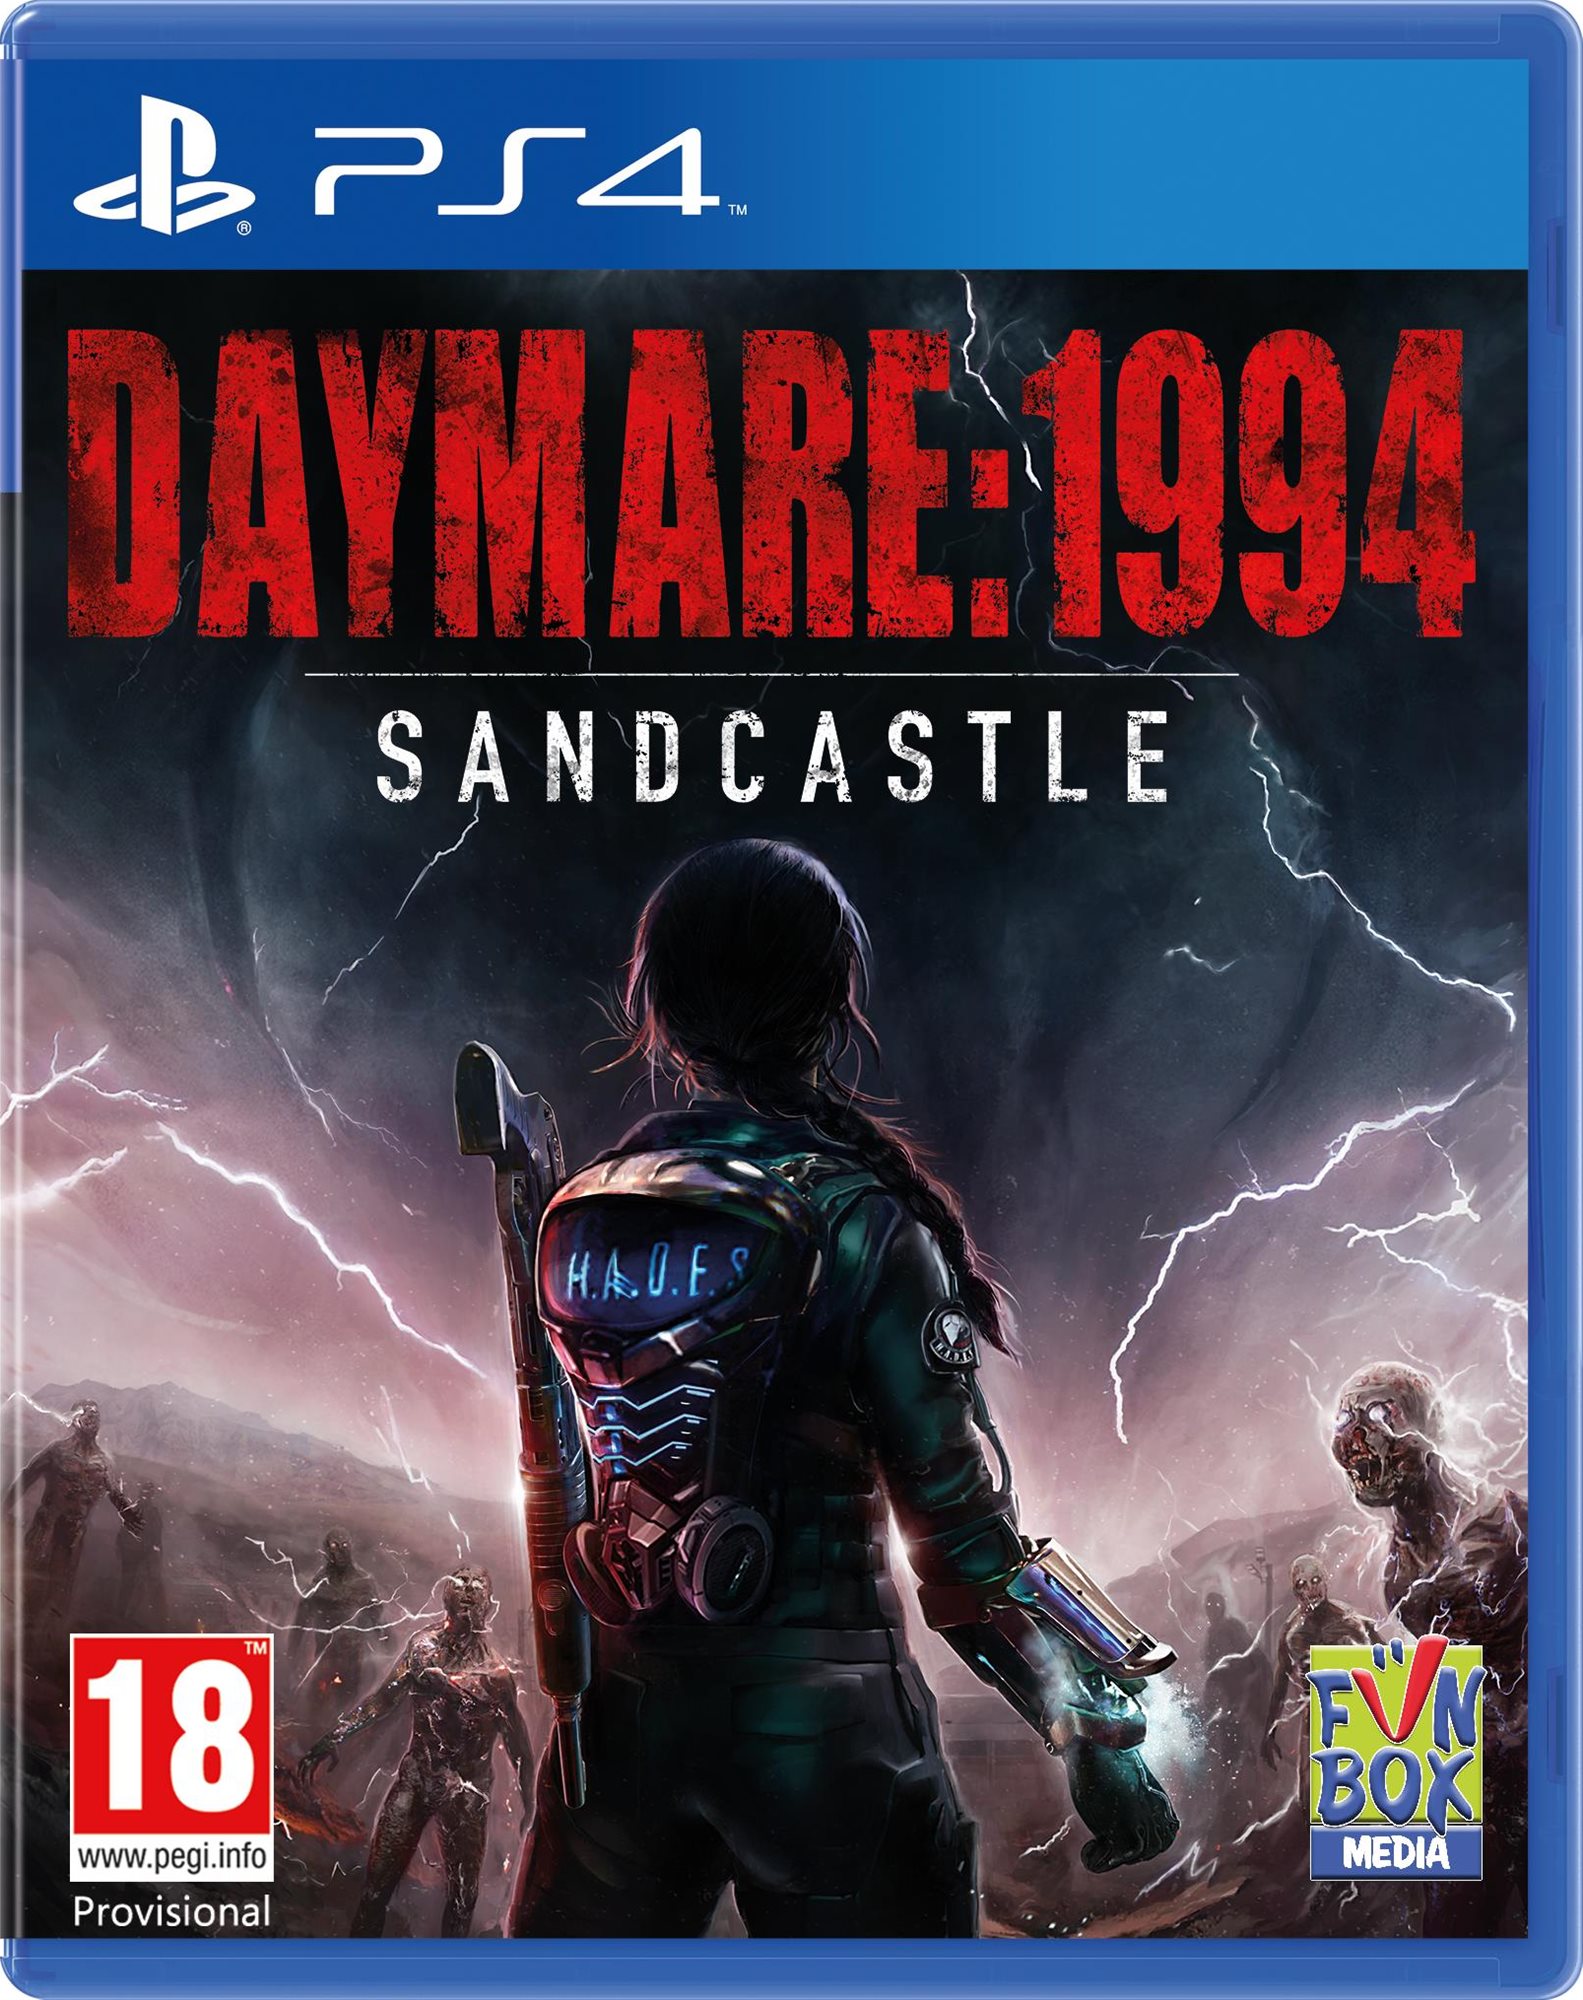 Daymare: 1994 Sandcastle - PS4